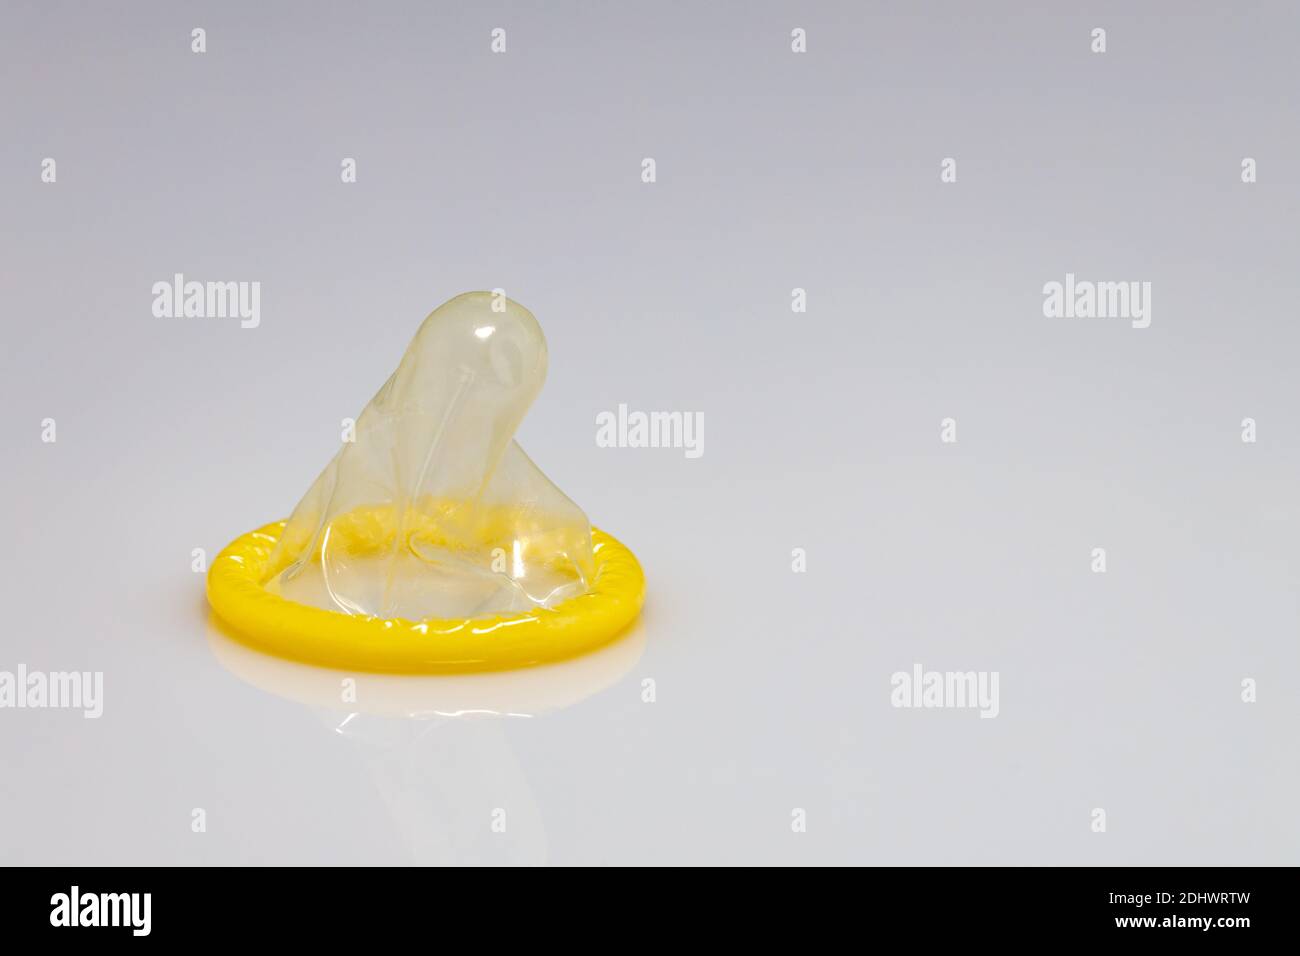 Condom on a white background Stock Photo